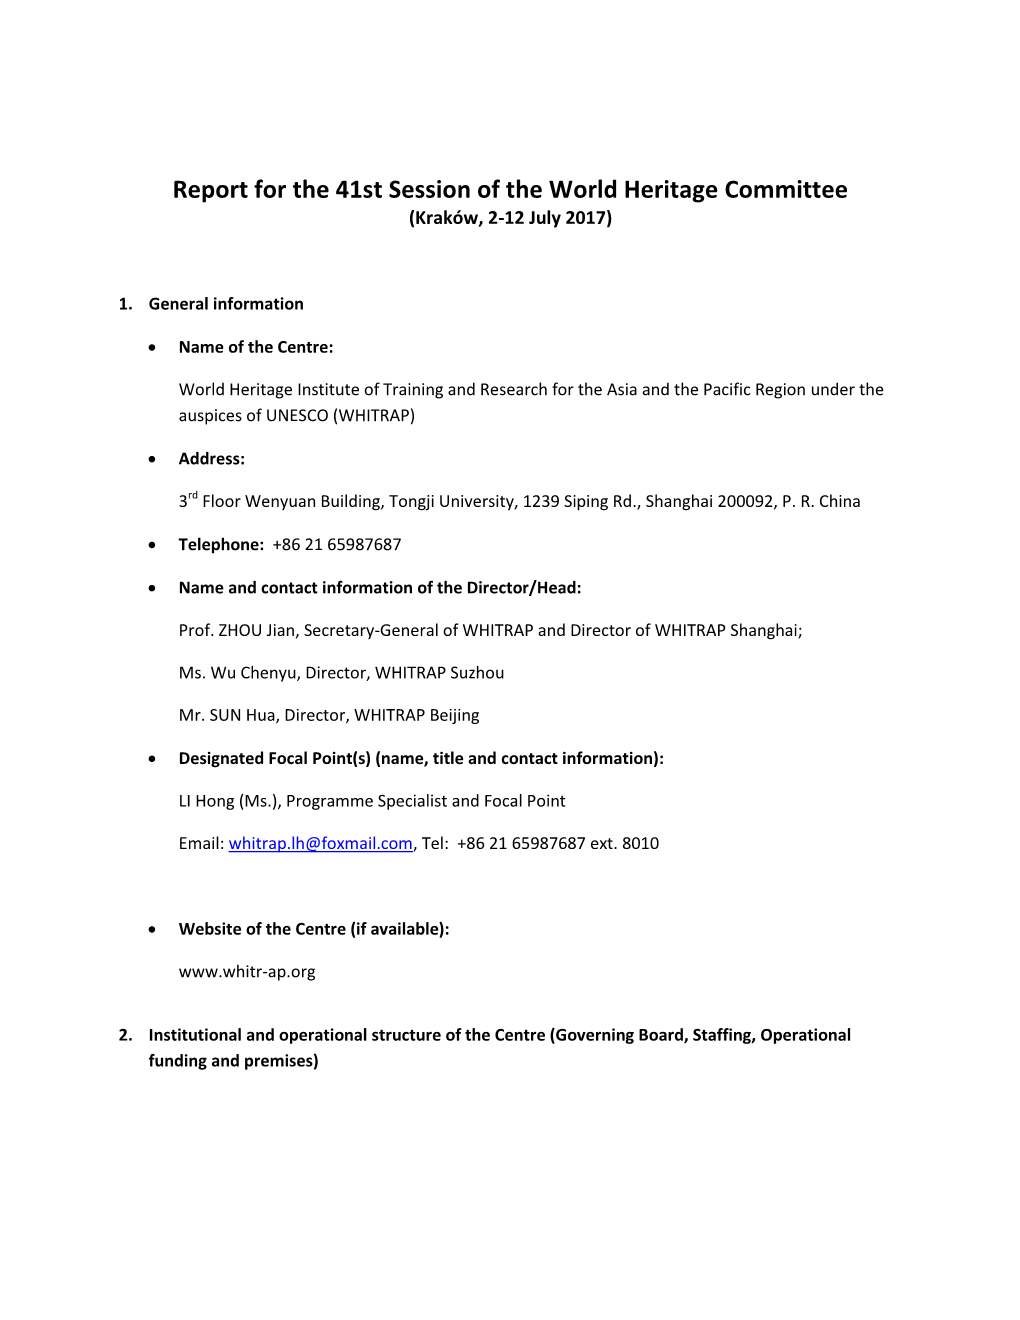 Report for the 41St Session of the World Heritage Committee (Kraków, 2-12 July 2017)